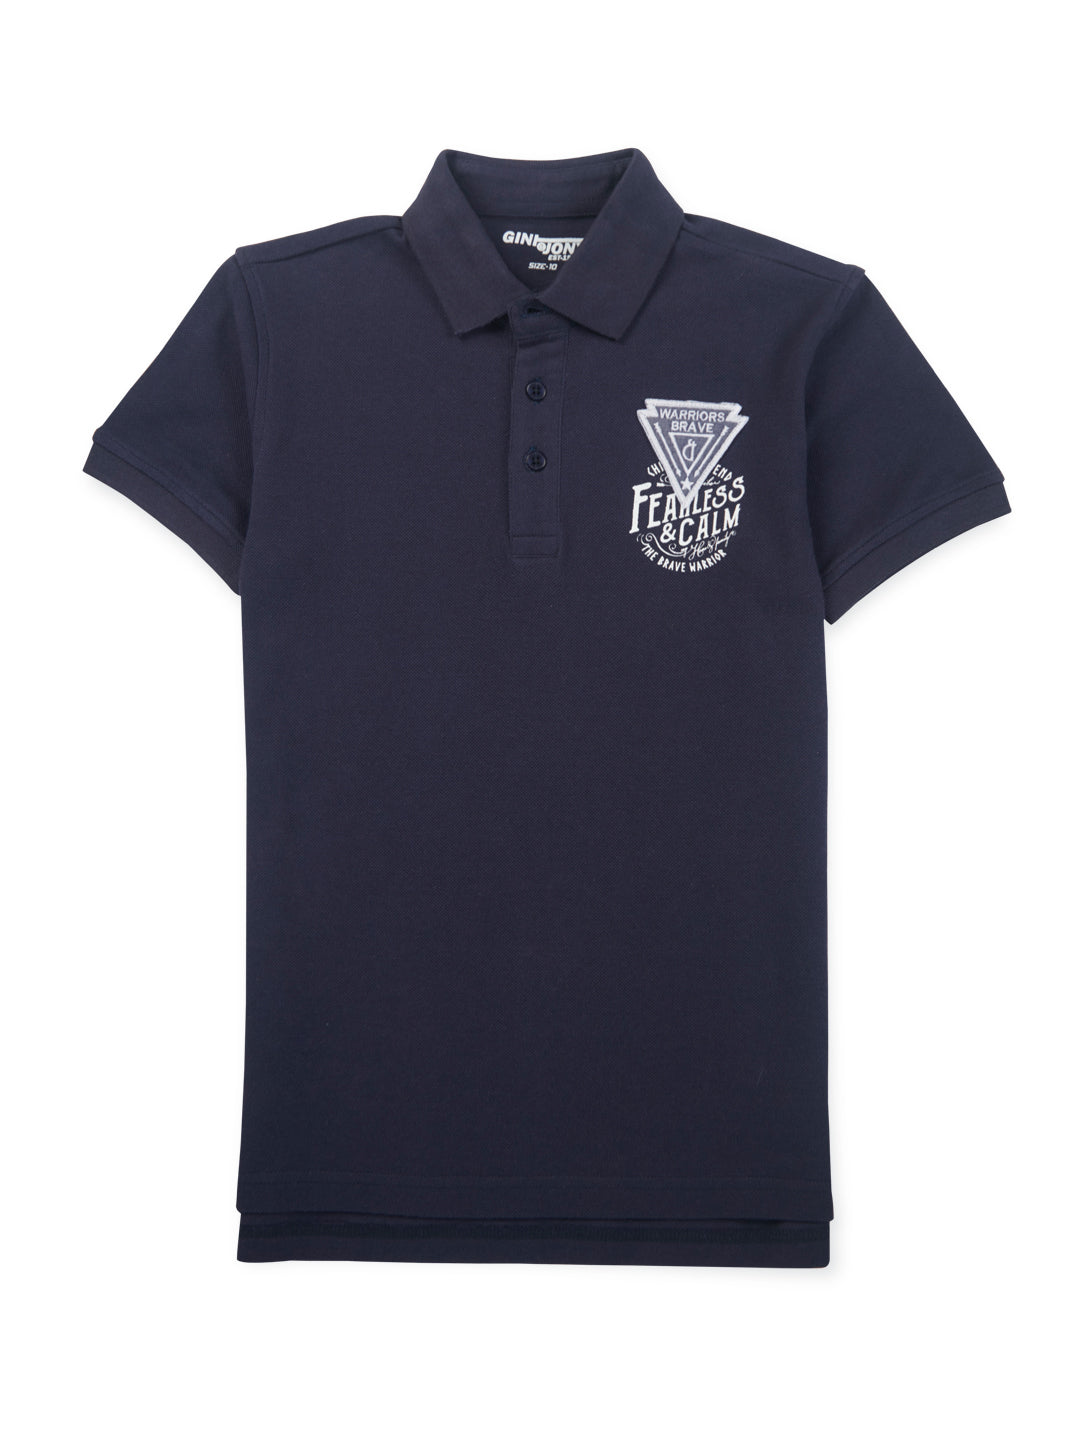 Boys blue printed knitted cotton polo t-shirt